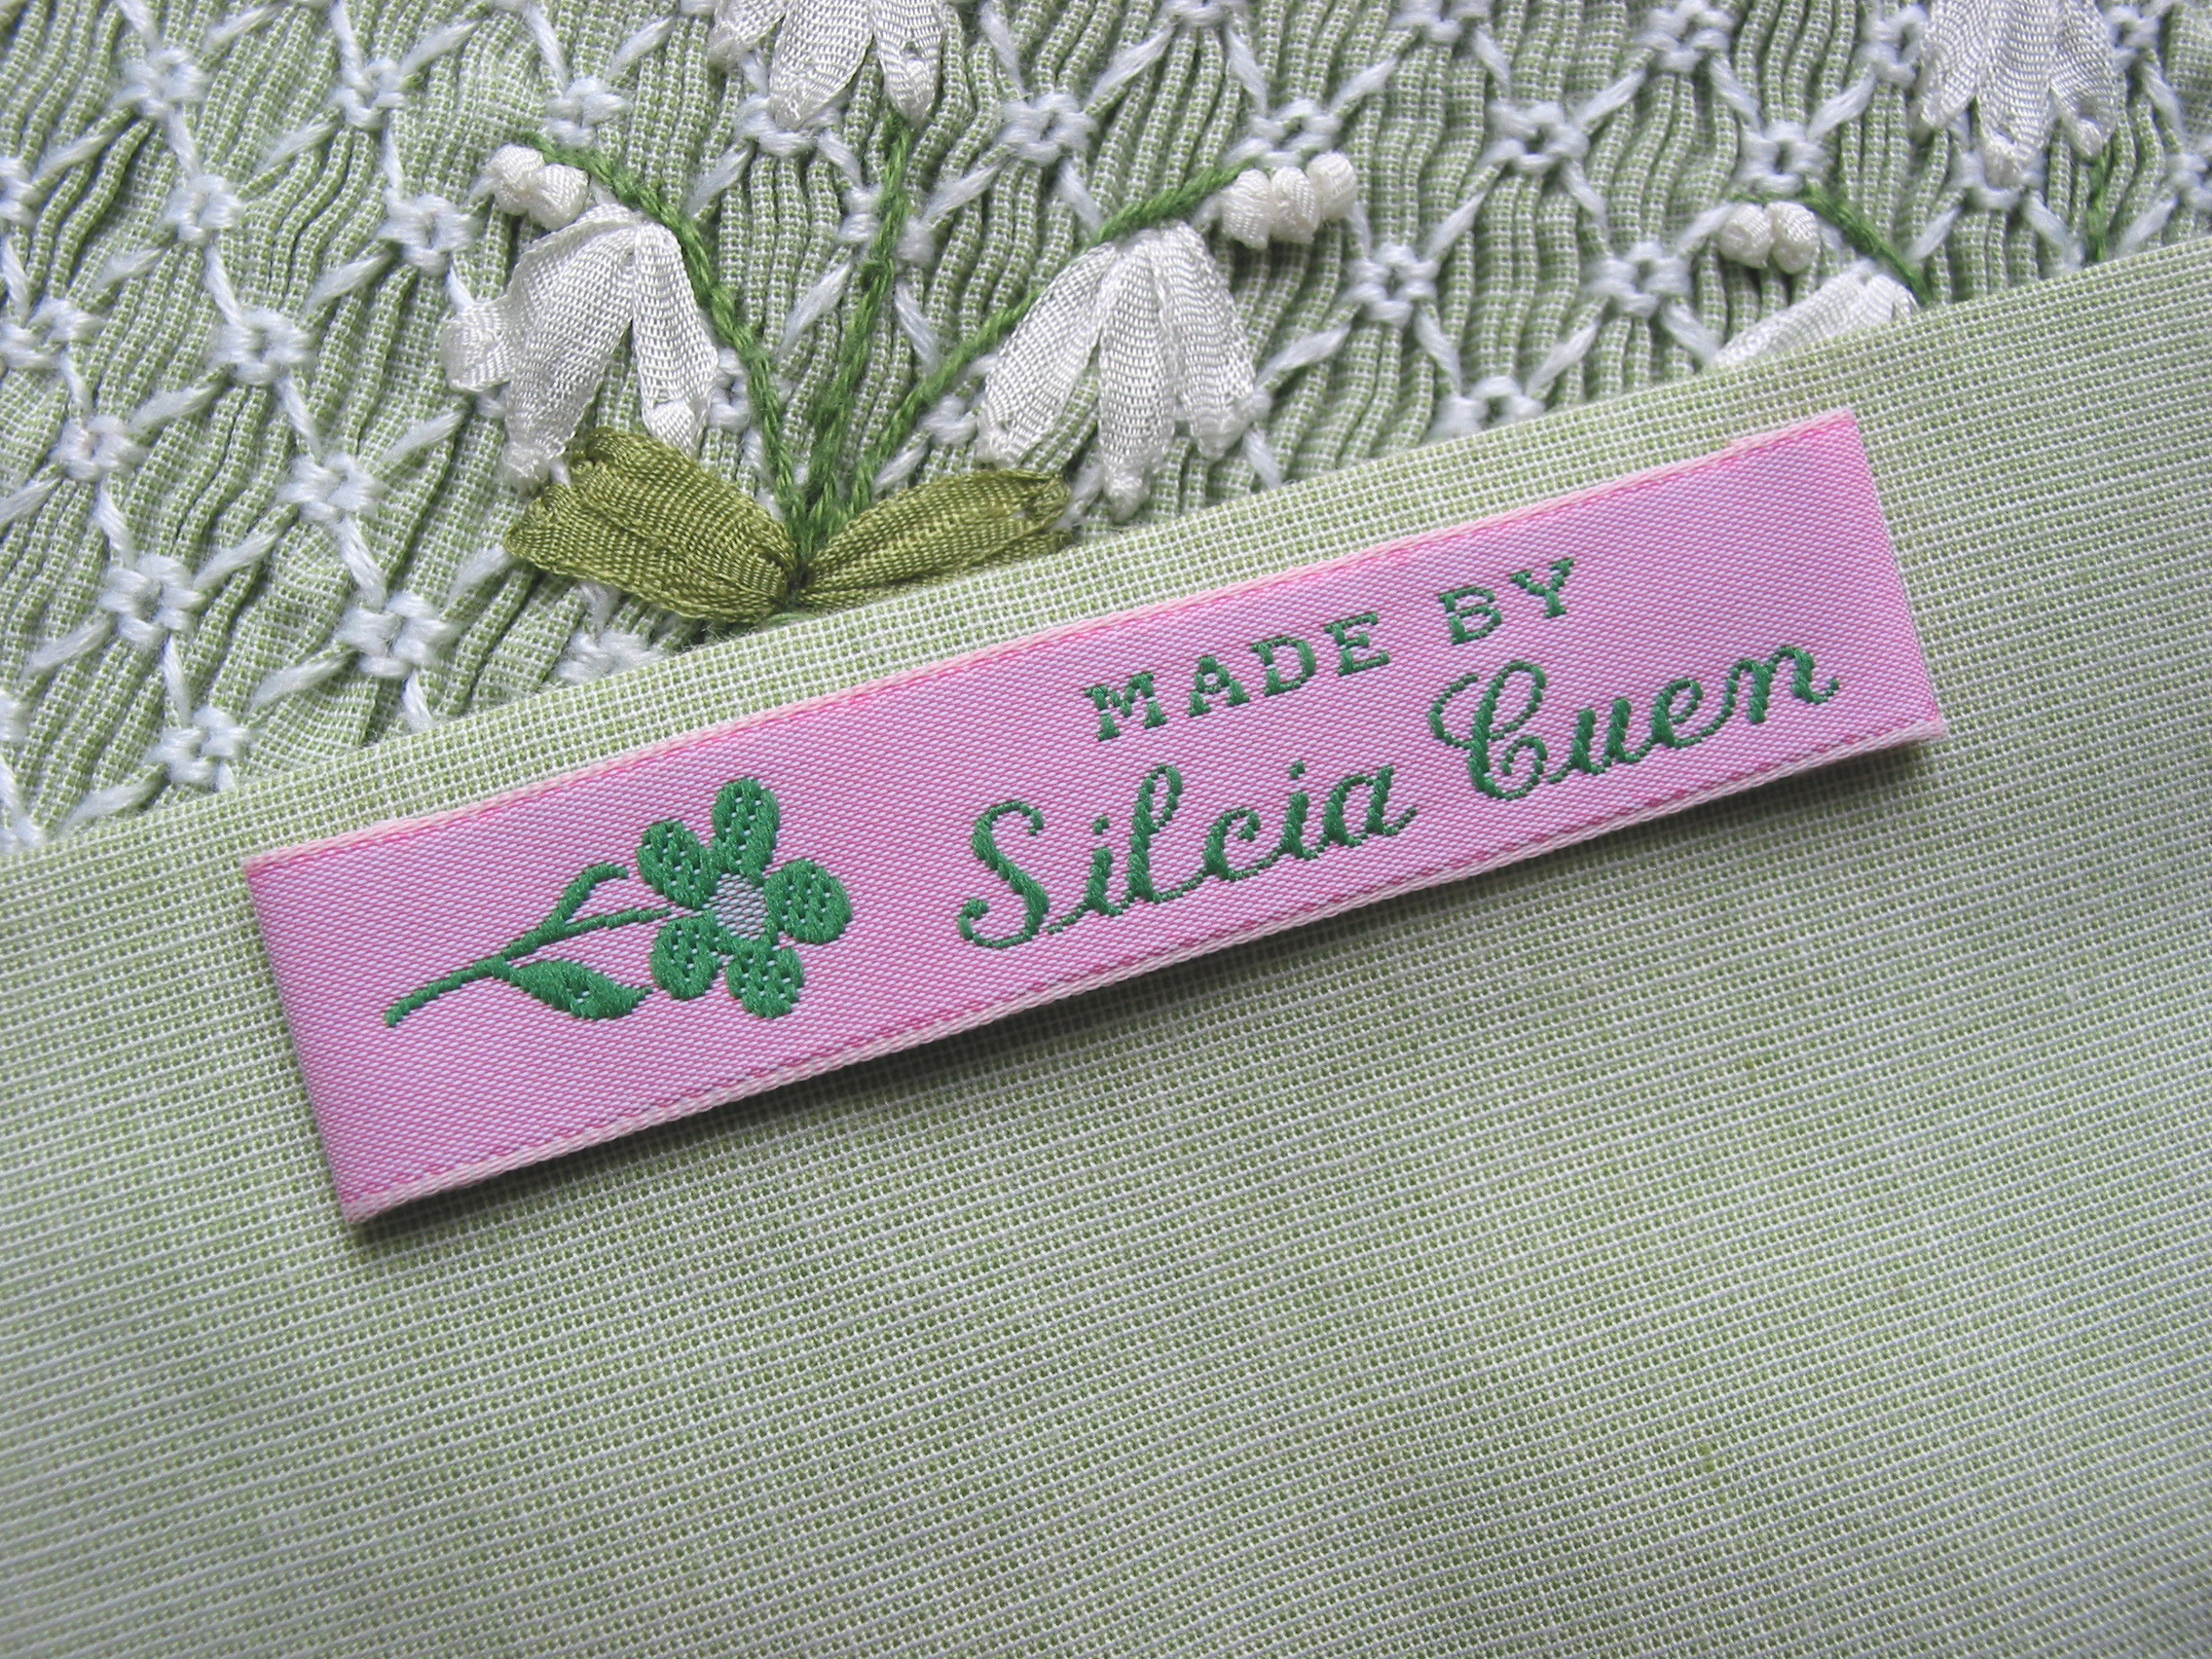 Iron On Fabric Labels | Iron On Woven Clothing Labels ...
